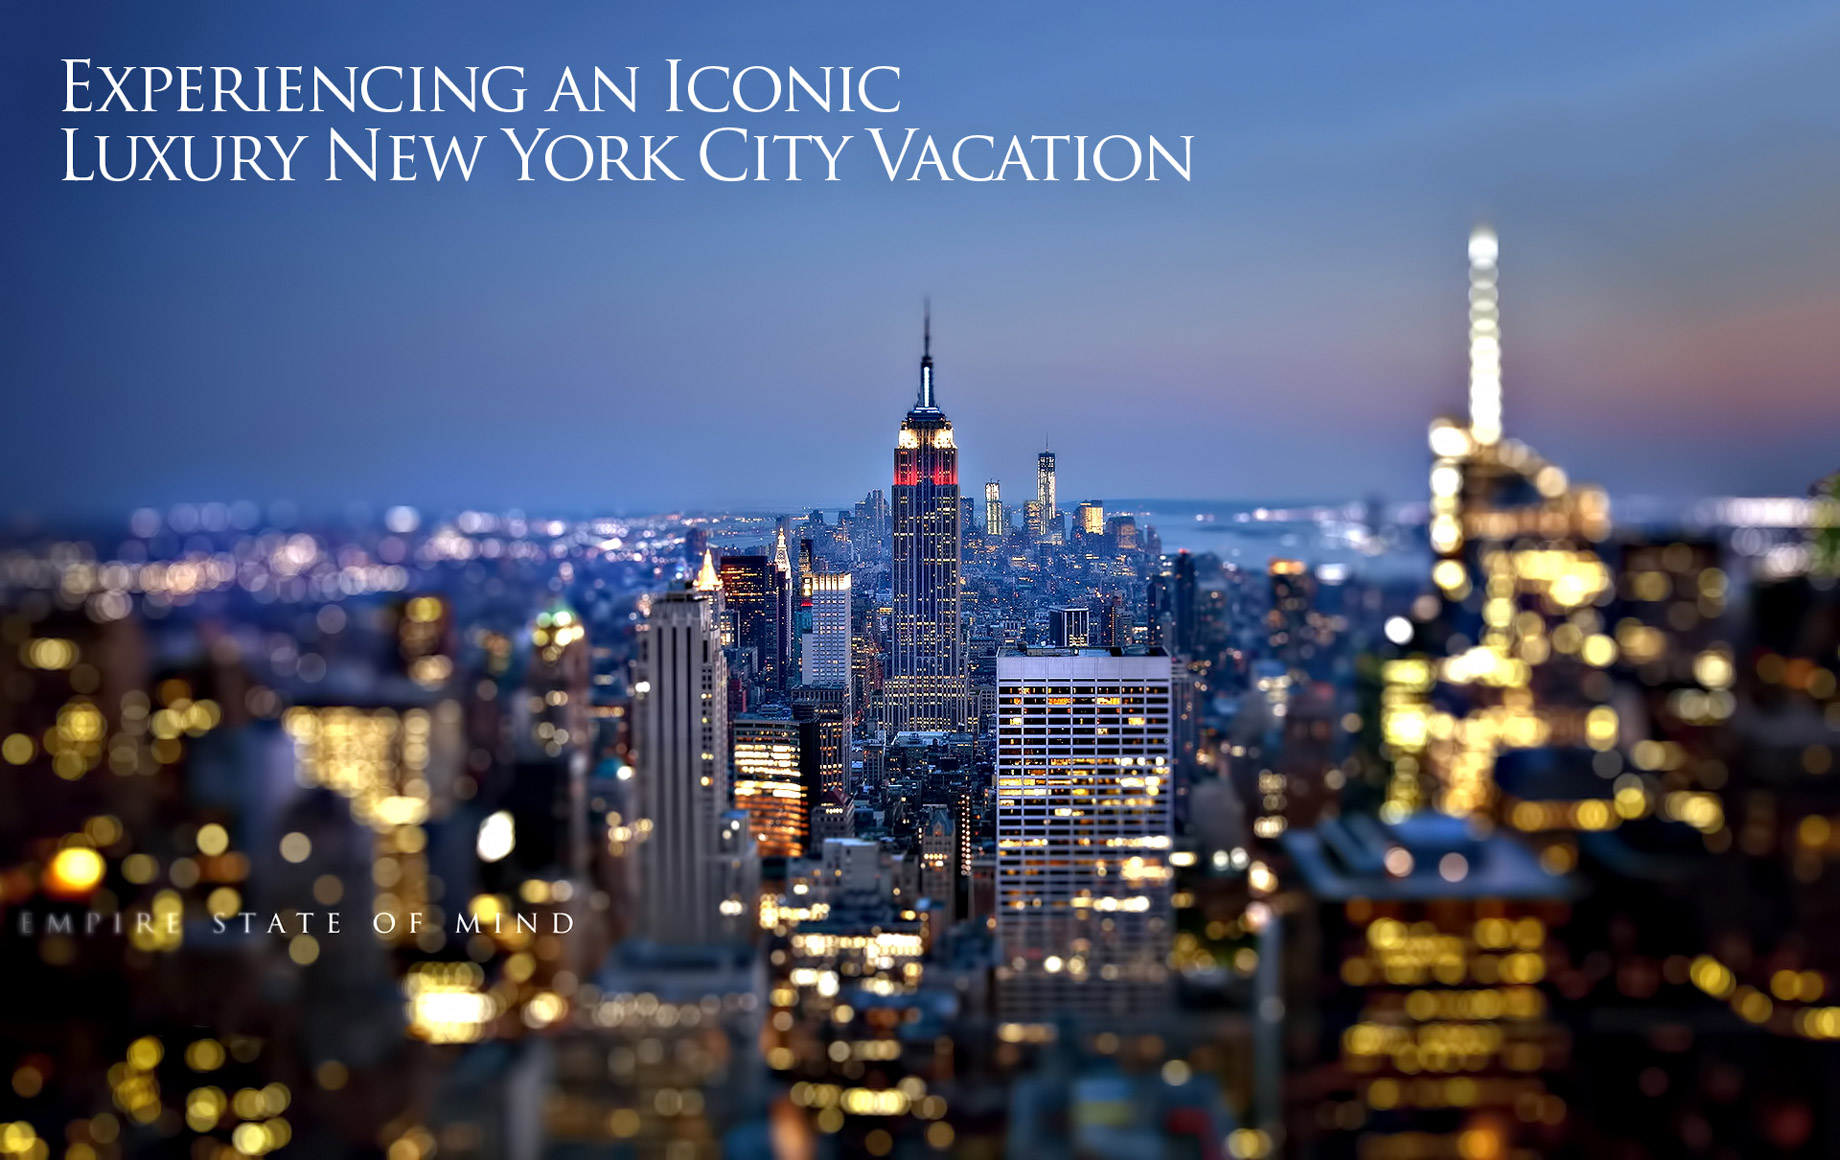 Empire State of Mind - Experiencing an Iconic Luxury New York City Vacation